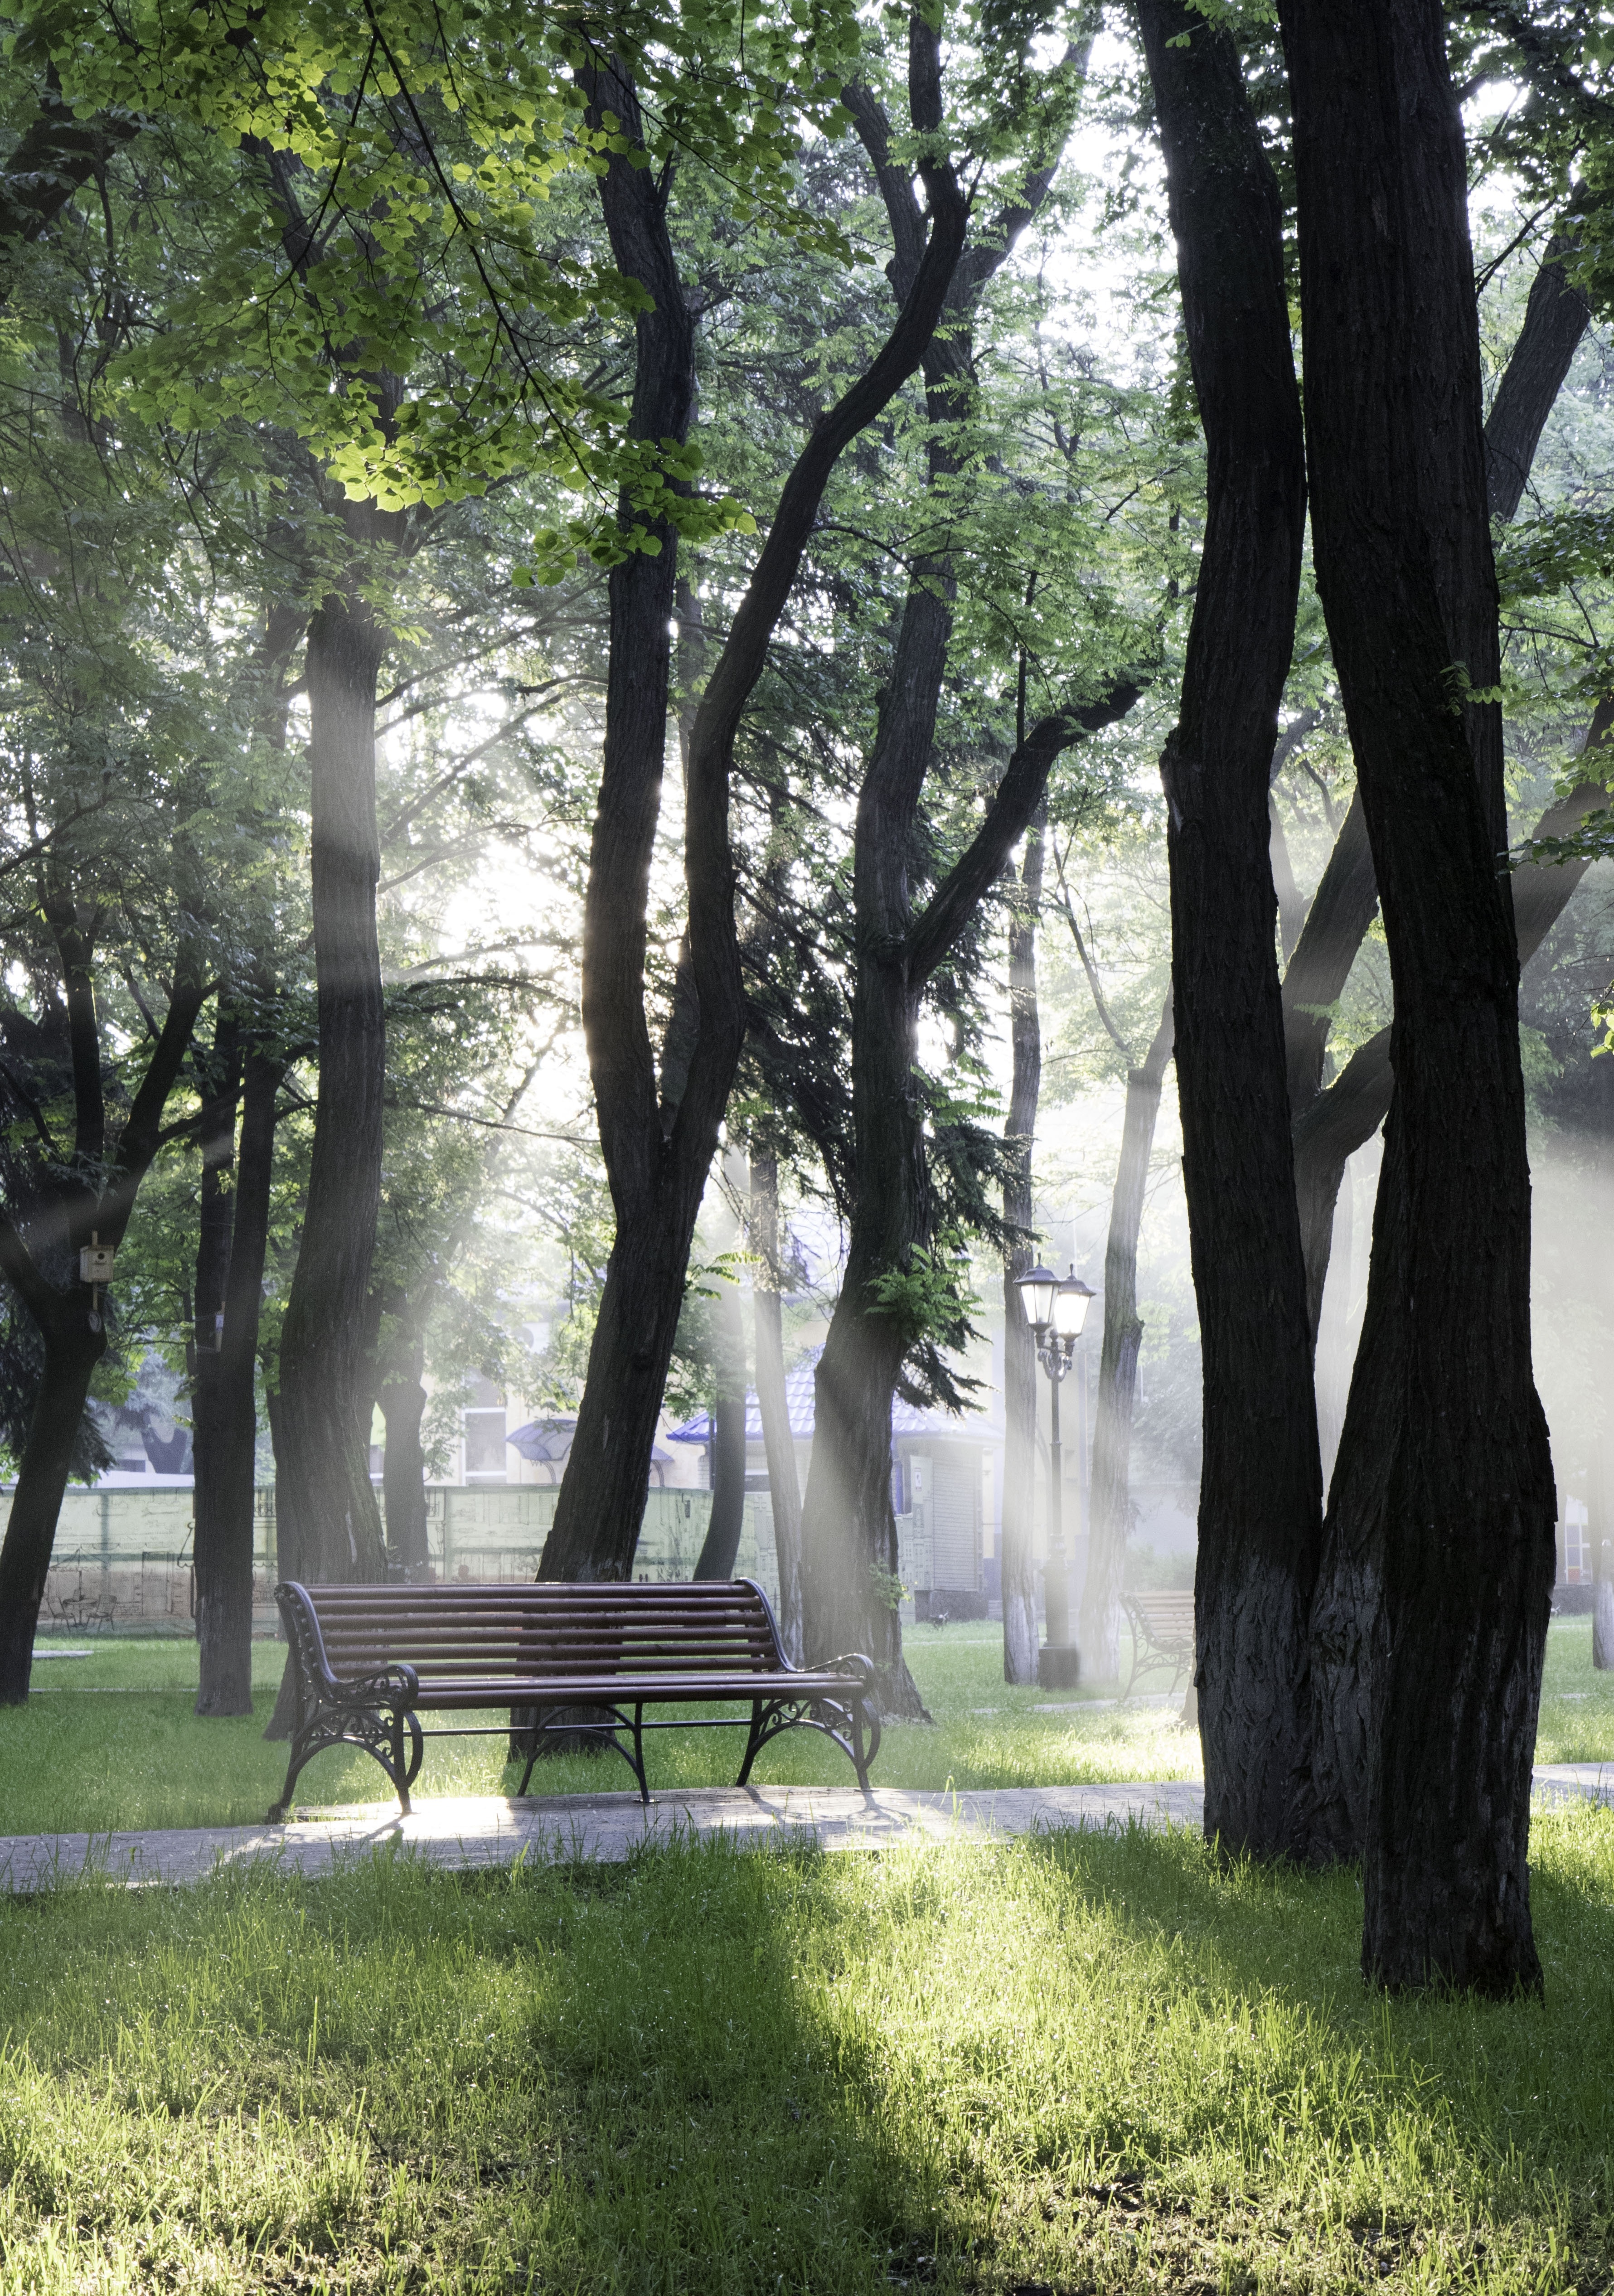 black wooden bench surrounded by trees in park during daytime